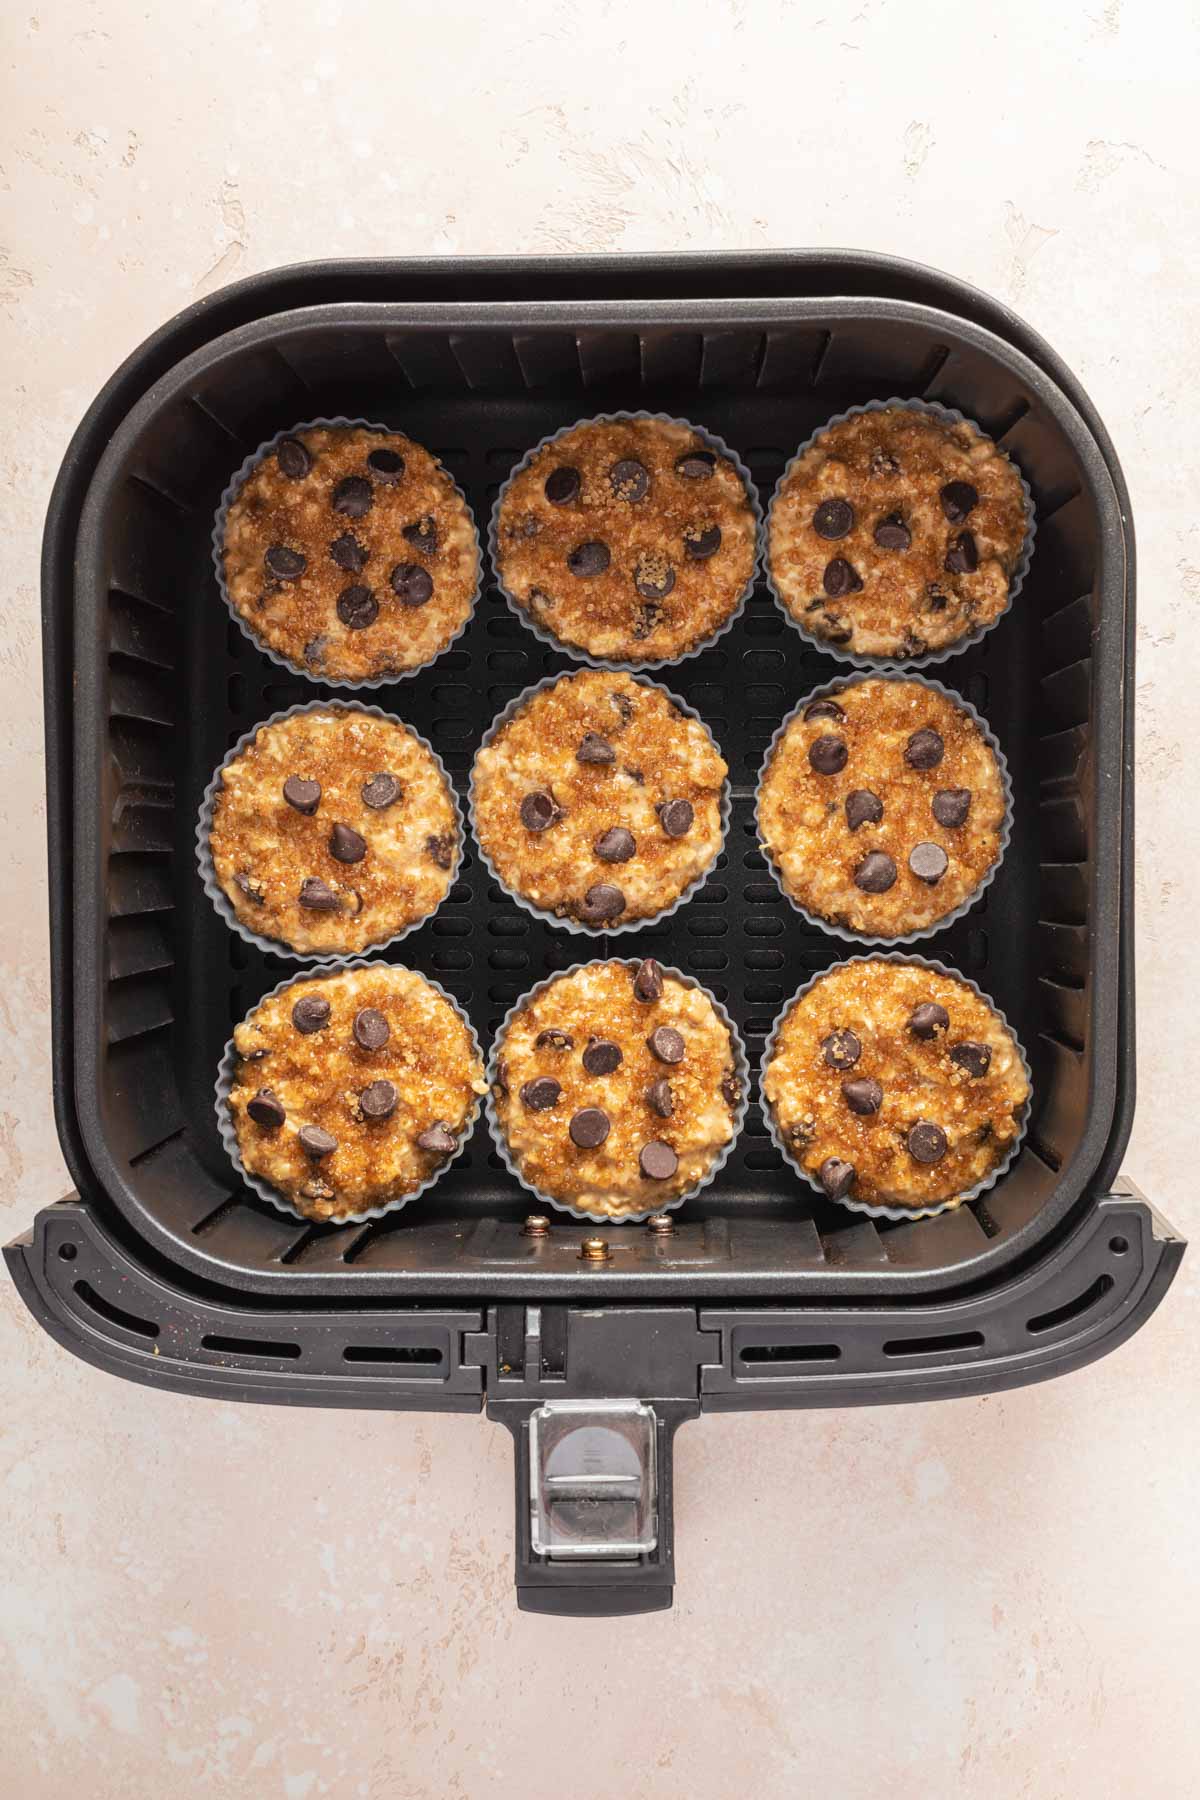 Silicone muffin cups filled with batter and arranged in the air fryer basket.